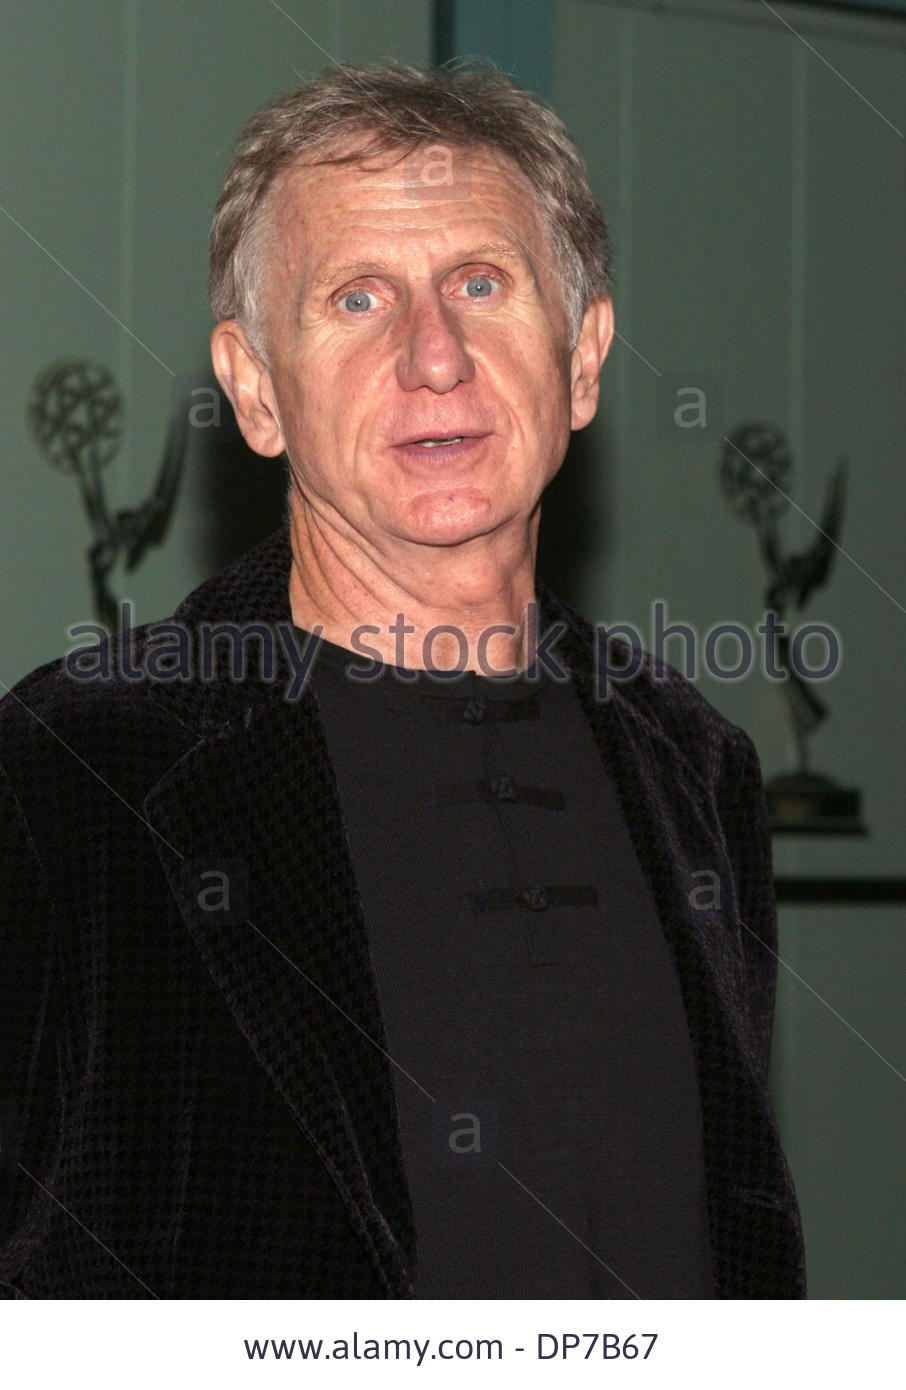 images-of-archie-hahn-actor